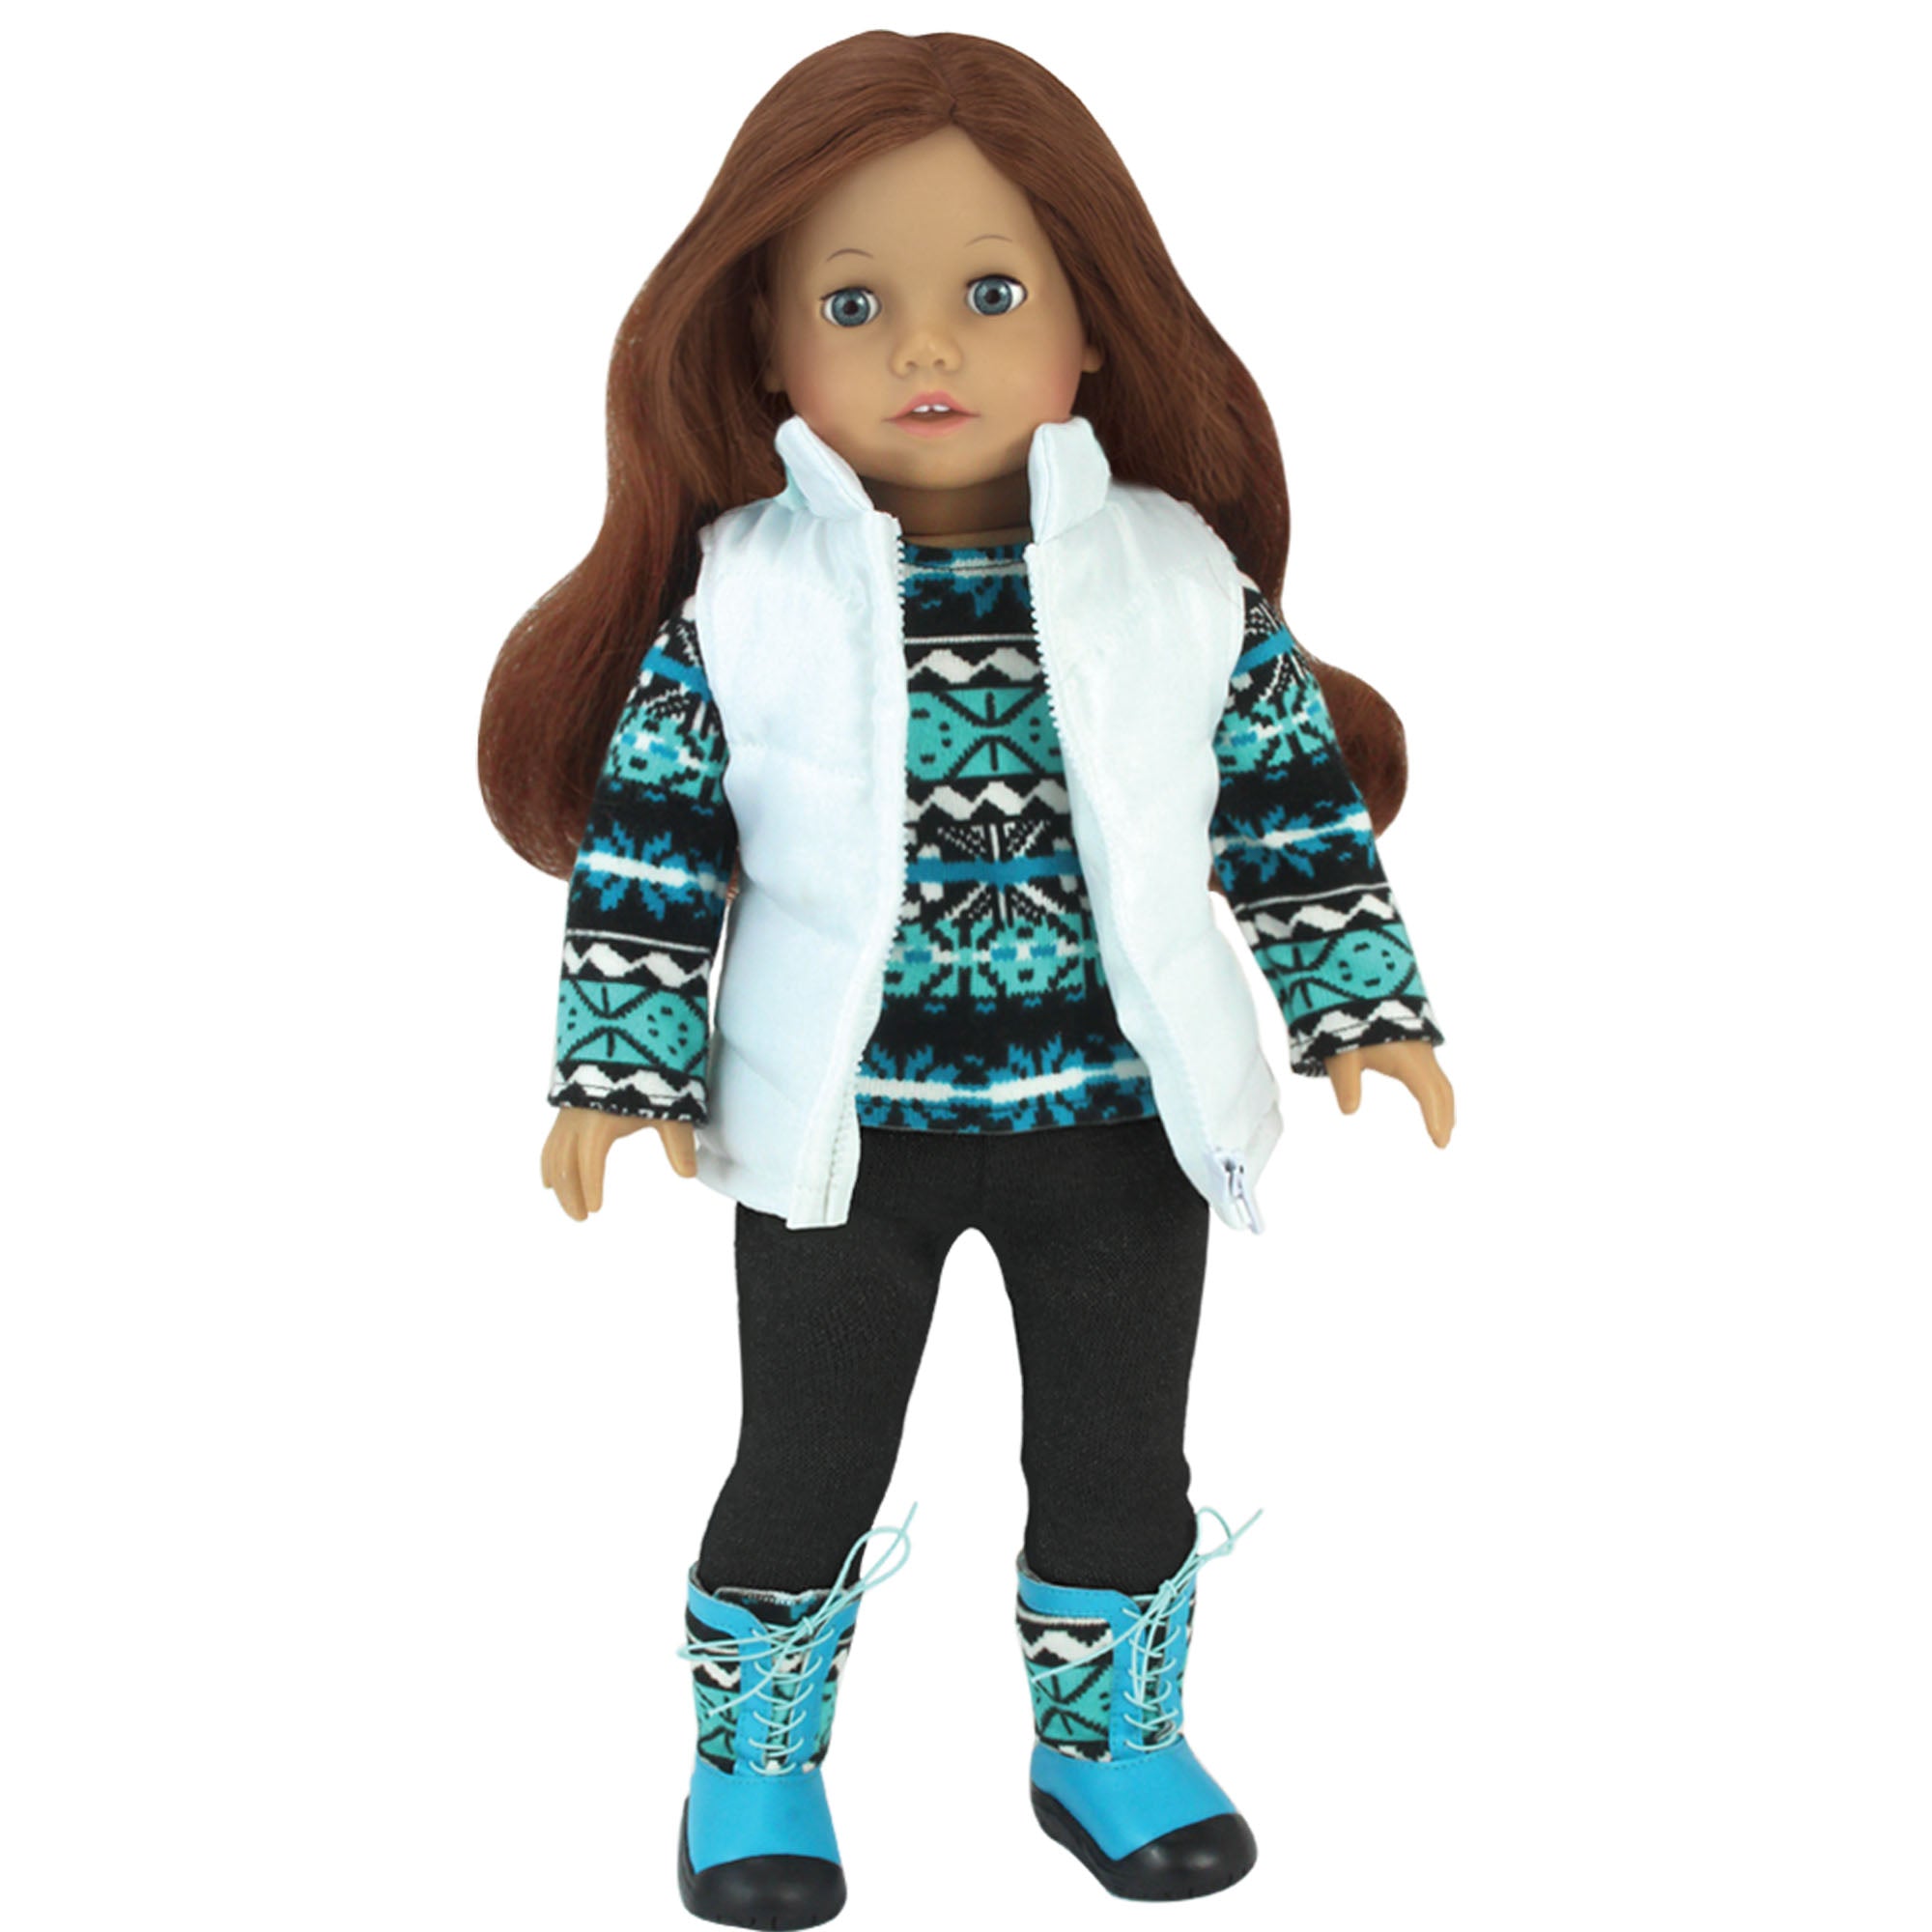 Sophia’s Complete Three-Piece Winter Boho Outfit with Ikat Print Sweater, Leggings, & Vest, Blue